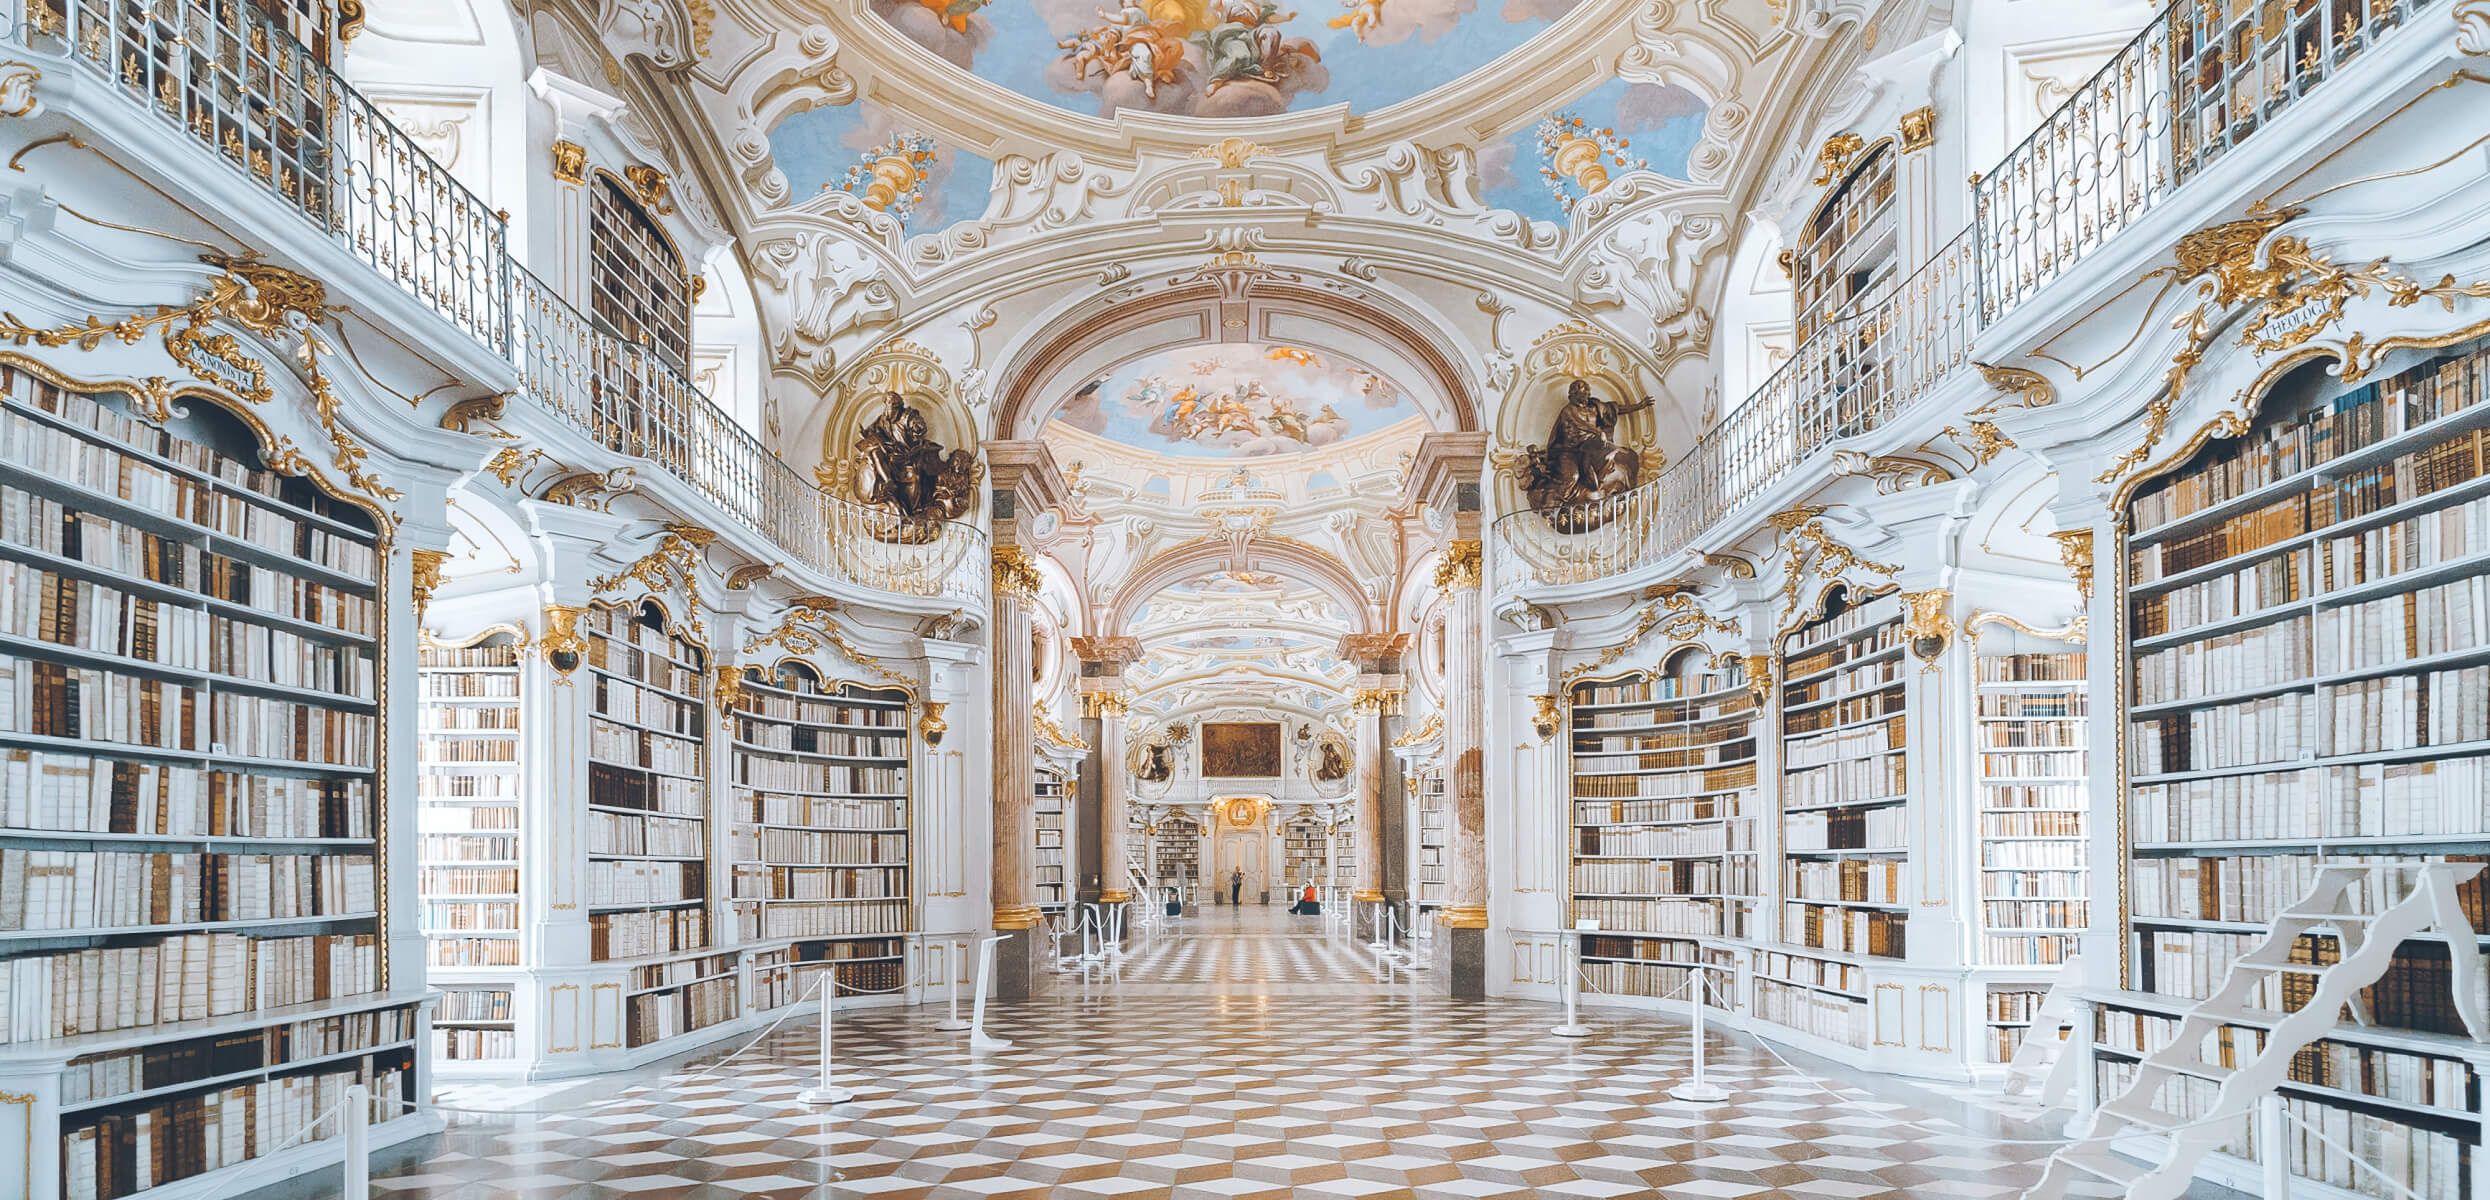 Grand library with marble pillars, gold details, and fresco ceiling